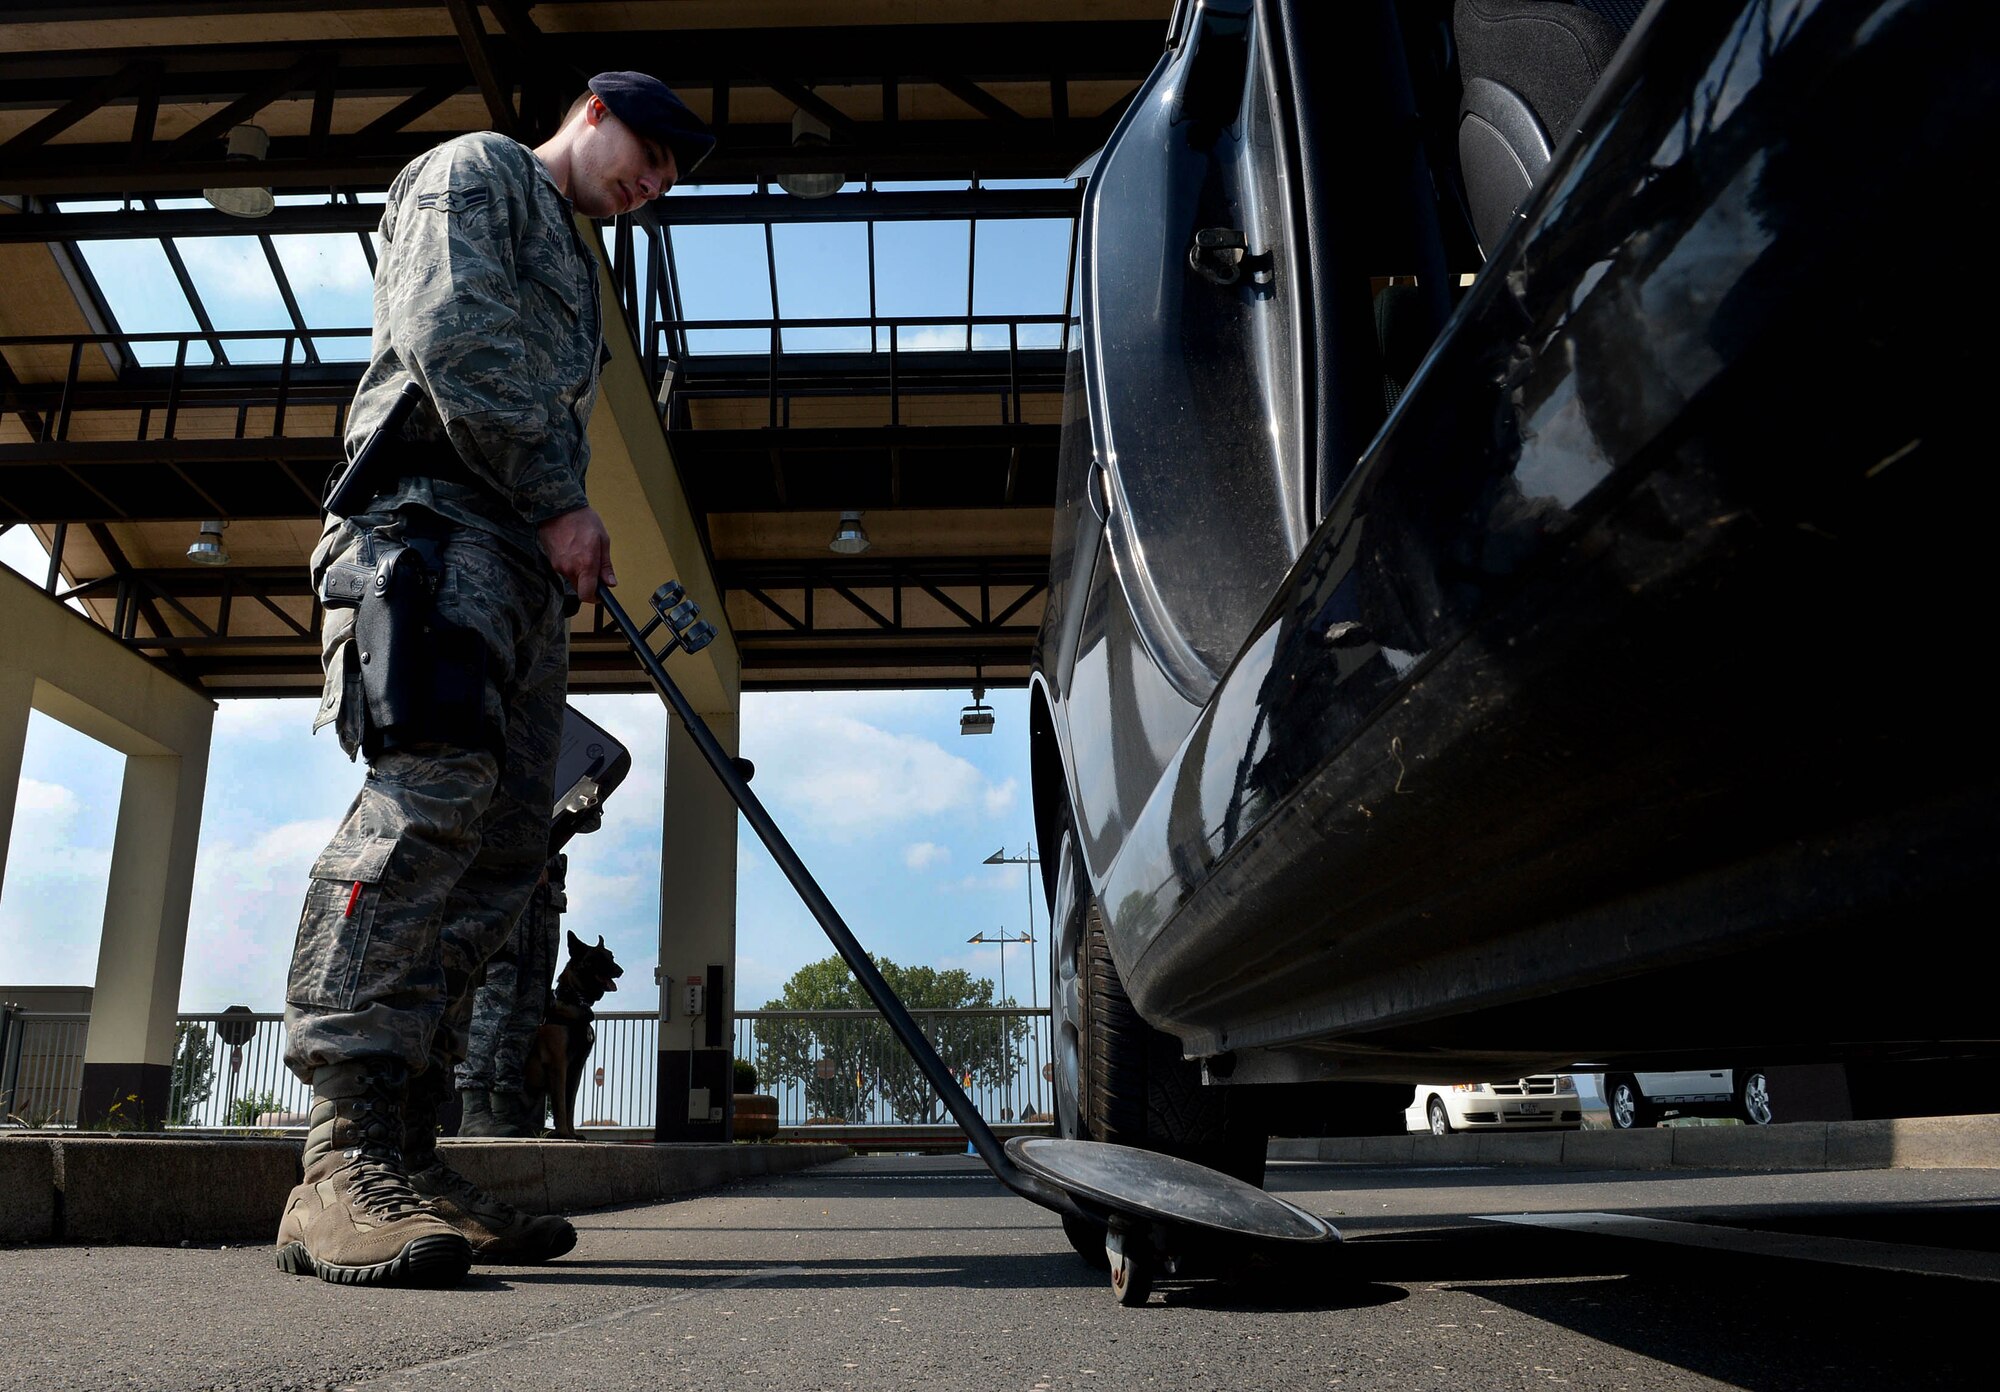 U.S. Air Force Airman 1st Class Justin Barber, 52nd Security Forces Squadron entry controller and native of Jacksonville, Fla., uses a mirror to search the undercarriage of a vehicle before it is allowed entrance to Spangdahlem Air Base, Germany, Sept., 9, 2014. Security forces entry controllers perform random vehicle inspections to ensure the base remains safe. They also encourage Airmen and families to use a program called Eagle Eyes that allows anyone to report suspicious activity. (U.S. Air Force photo by Airman 1st Class Kyle Gese/Released)